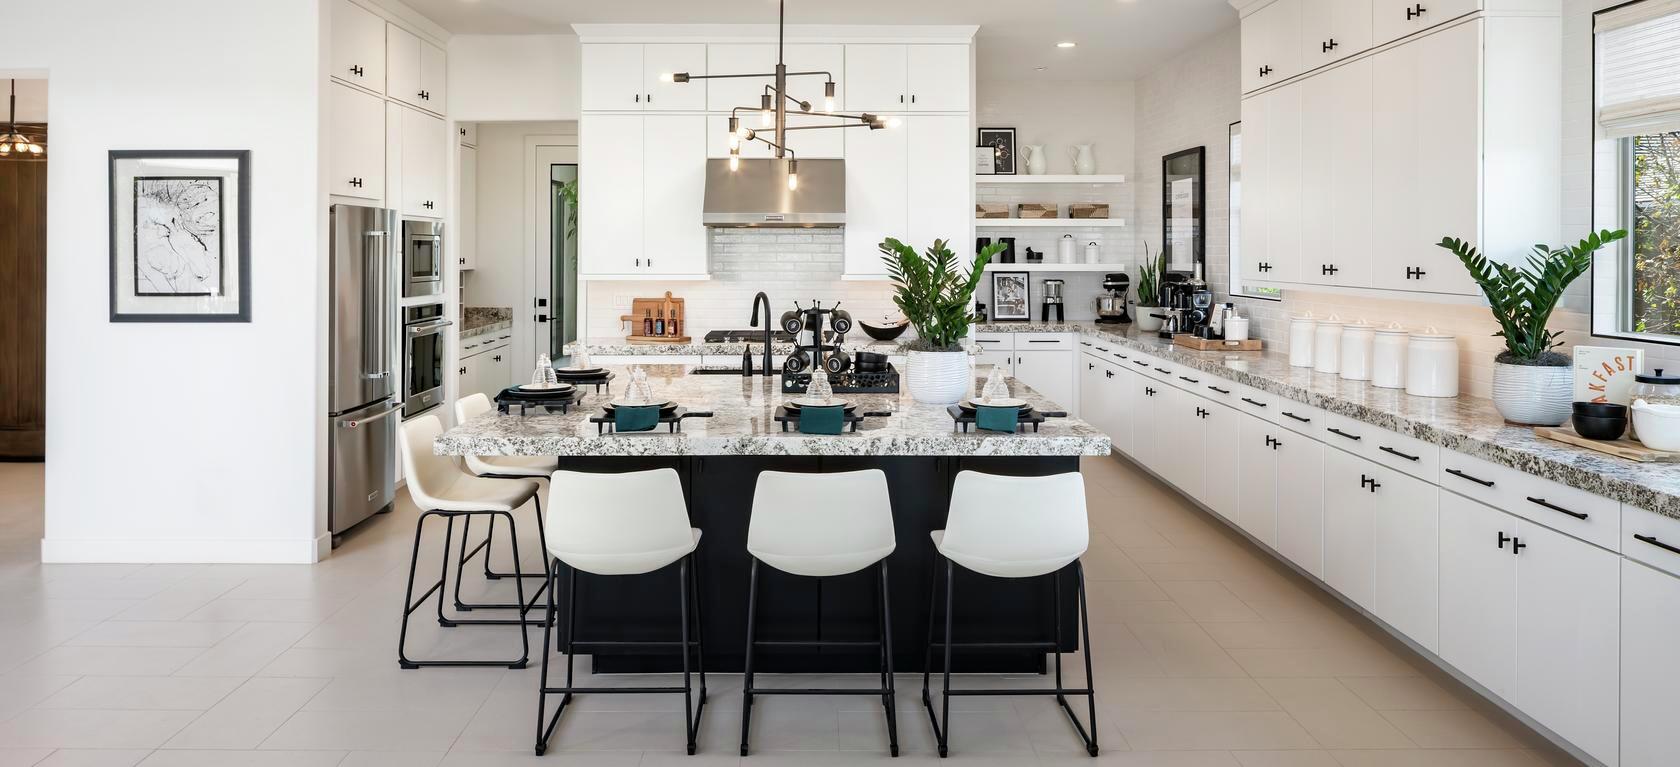 5 double island kitchen ideas for your custom home